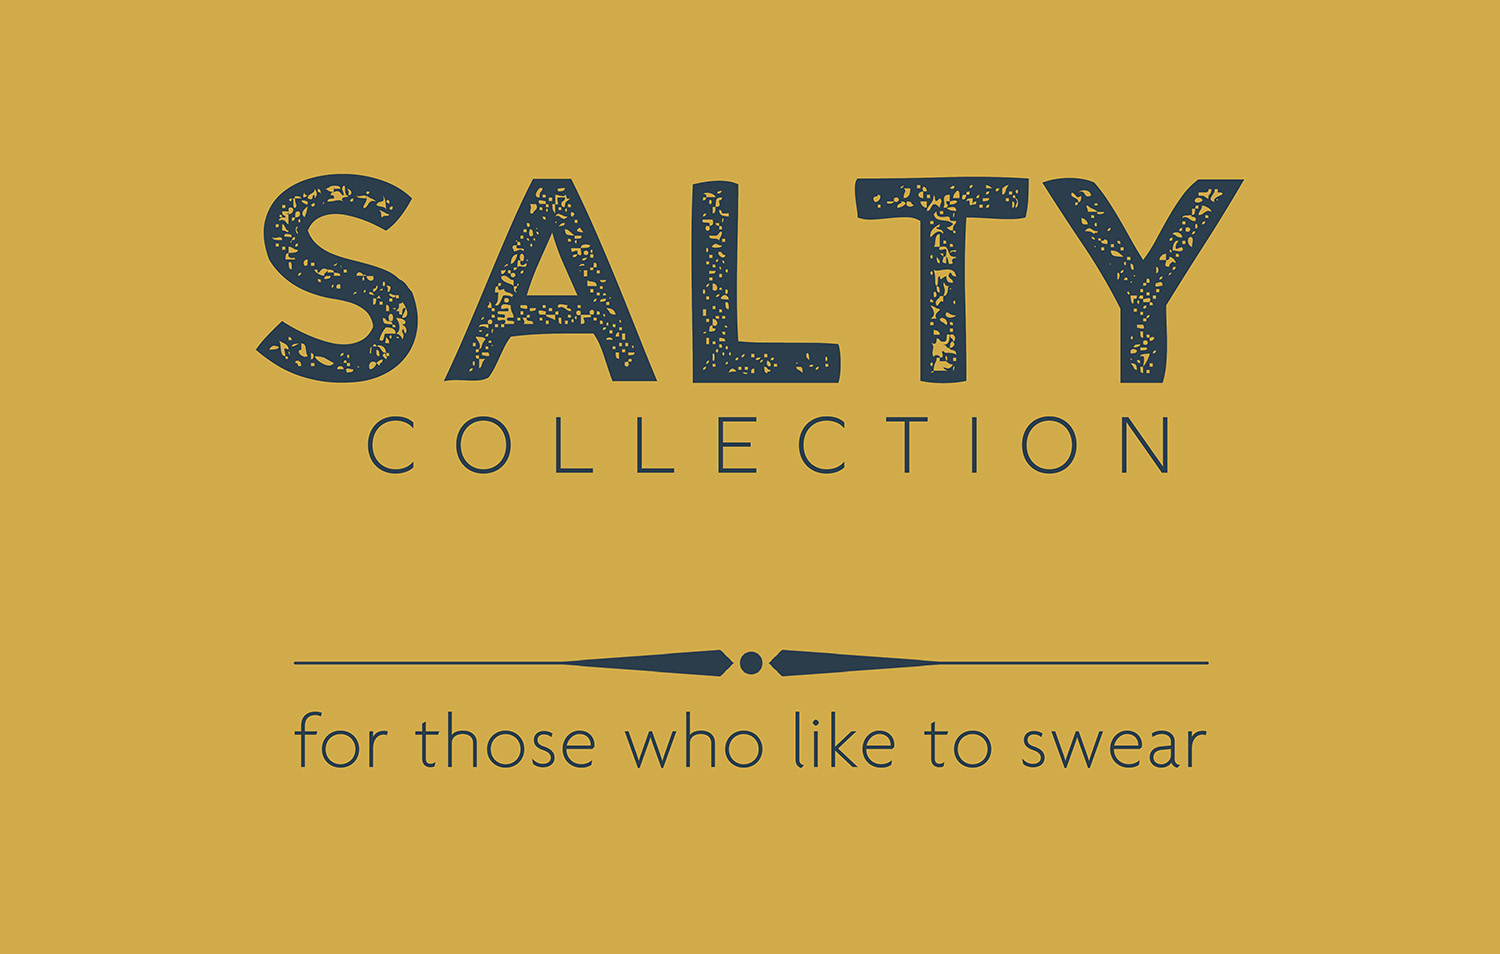 mustard yellow background with dark blue text that says, "Salty collection, for those who like to swear."